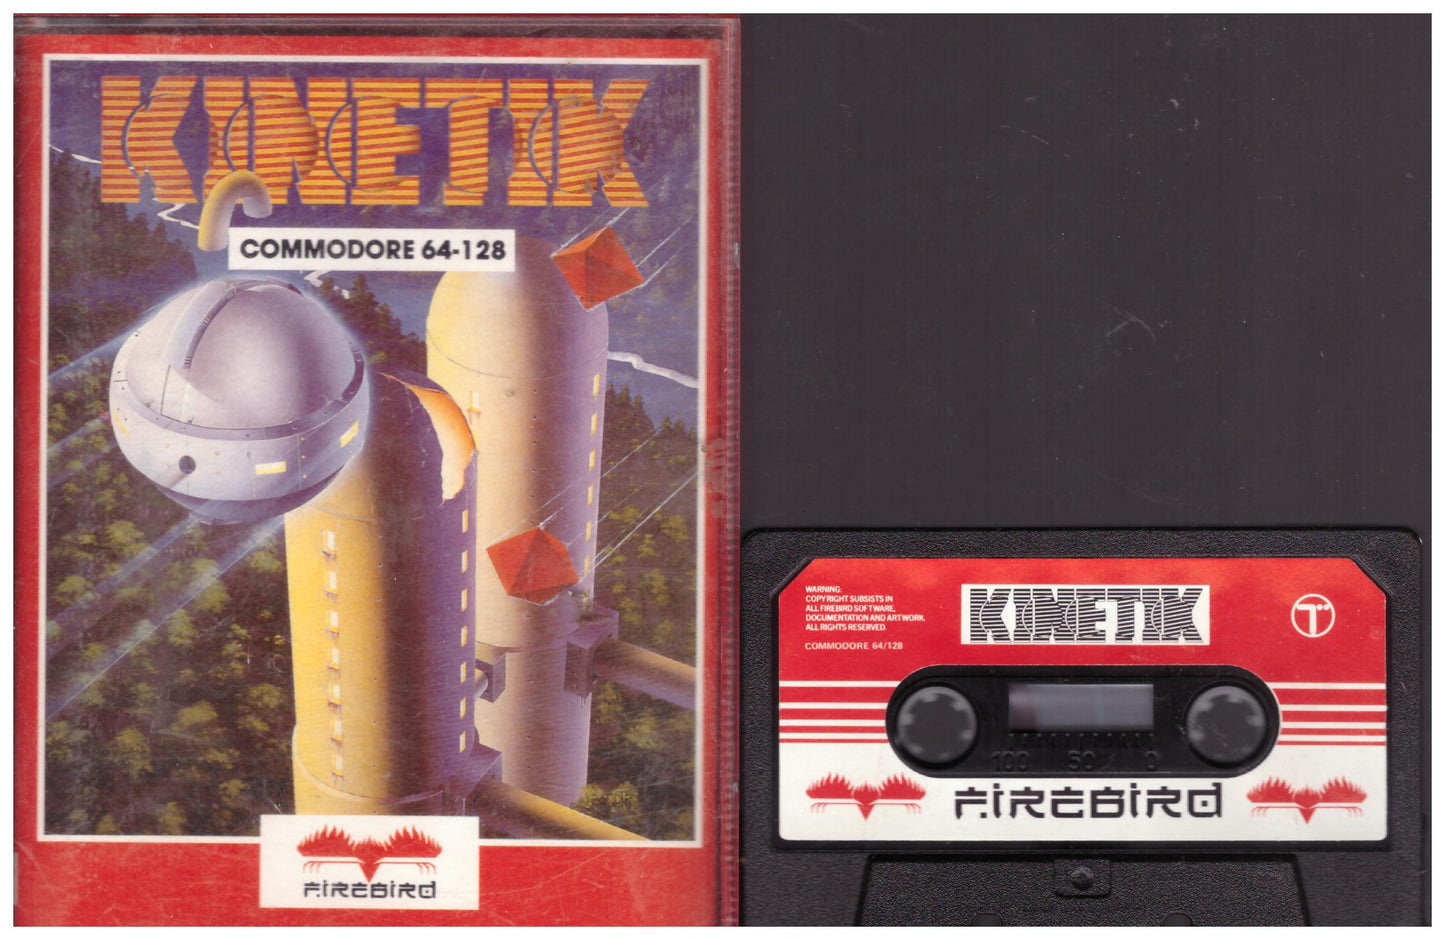 Kinetik for Commodore 64 from Firebird